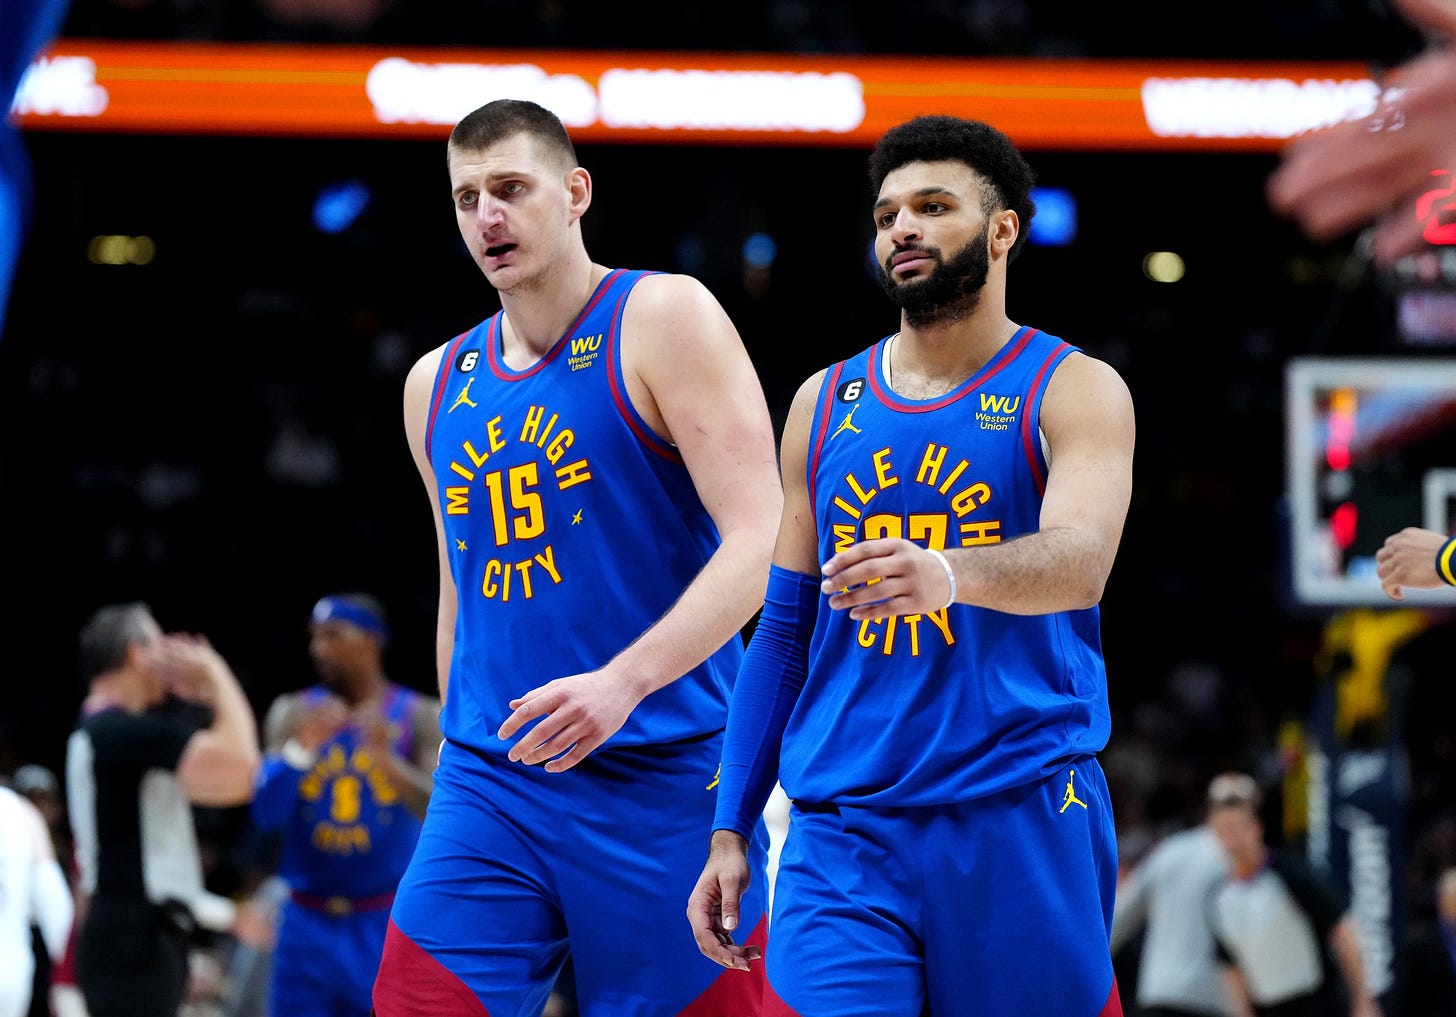 Nikola Jokic and Jamal Murray are proving they're the NBA's top duo